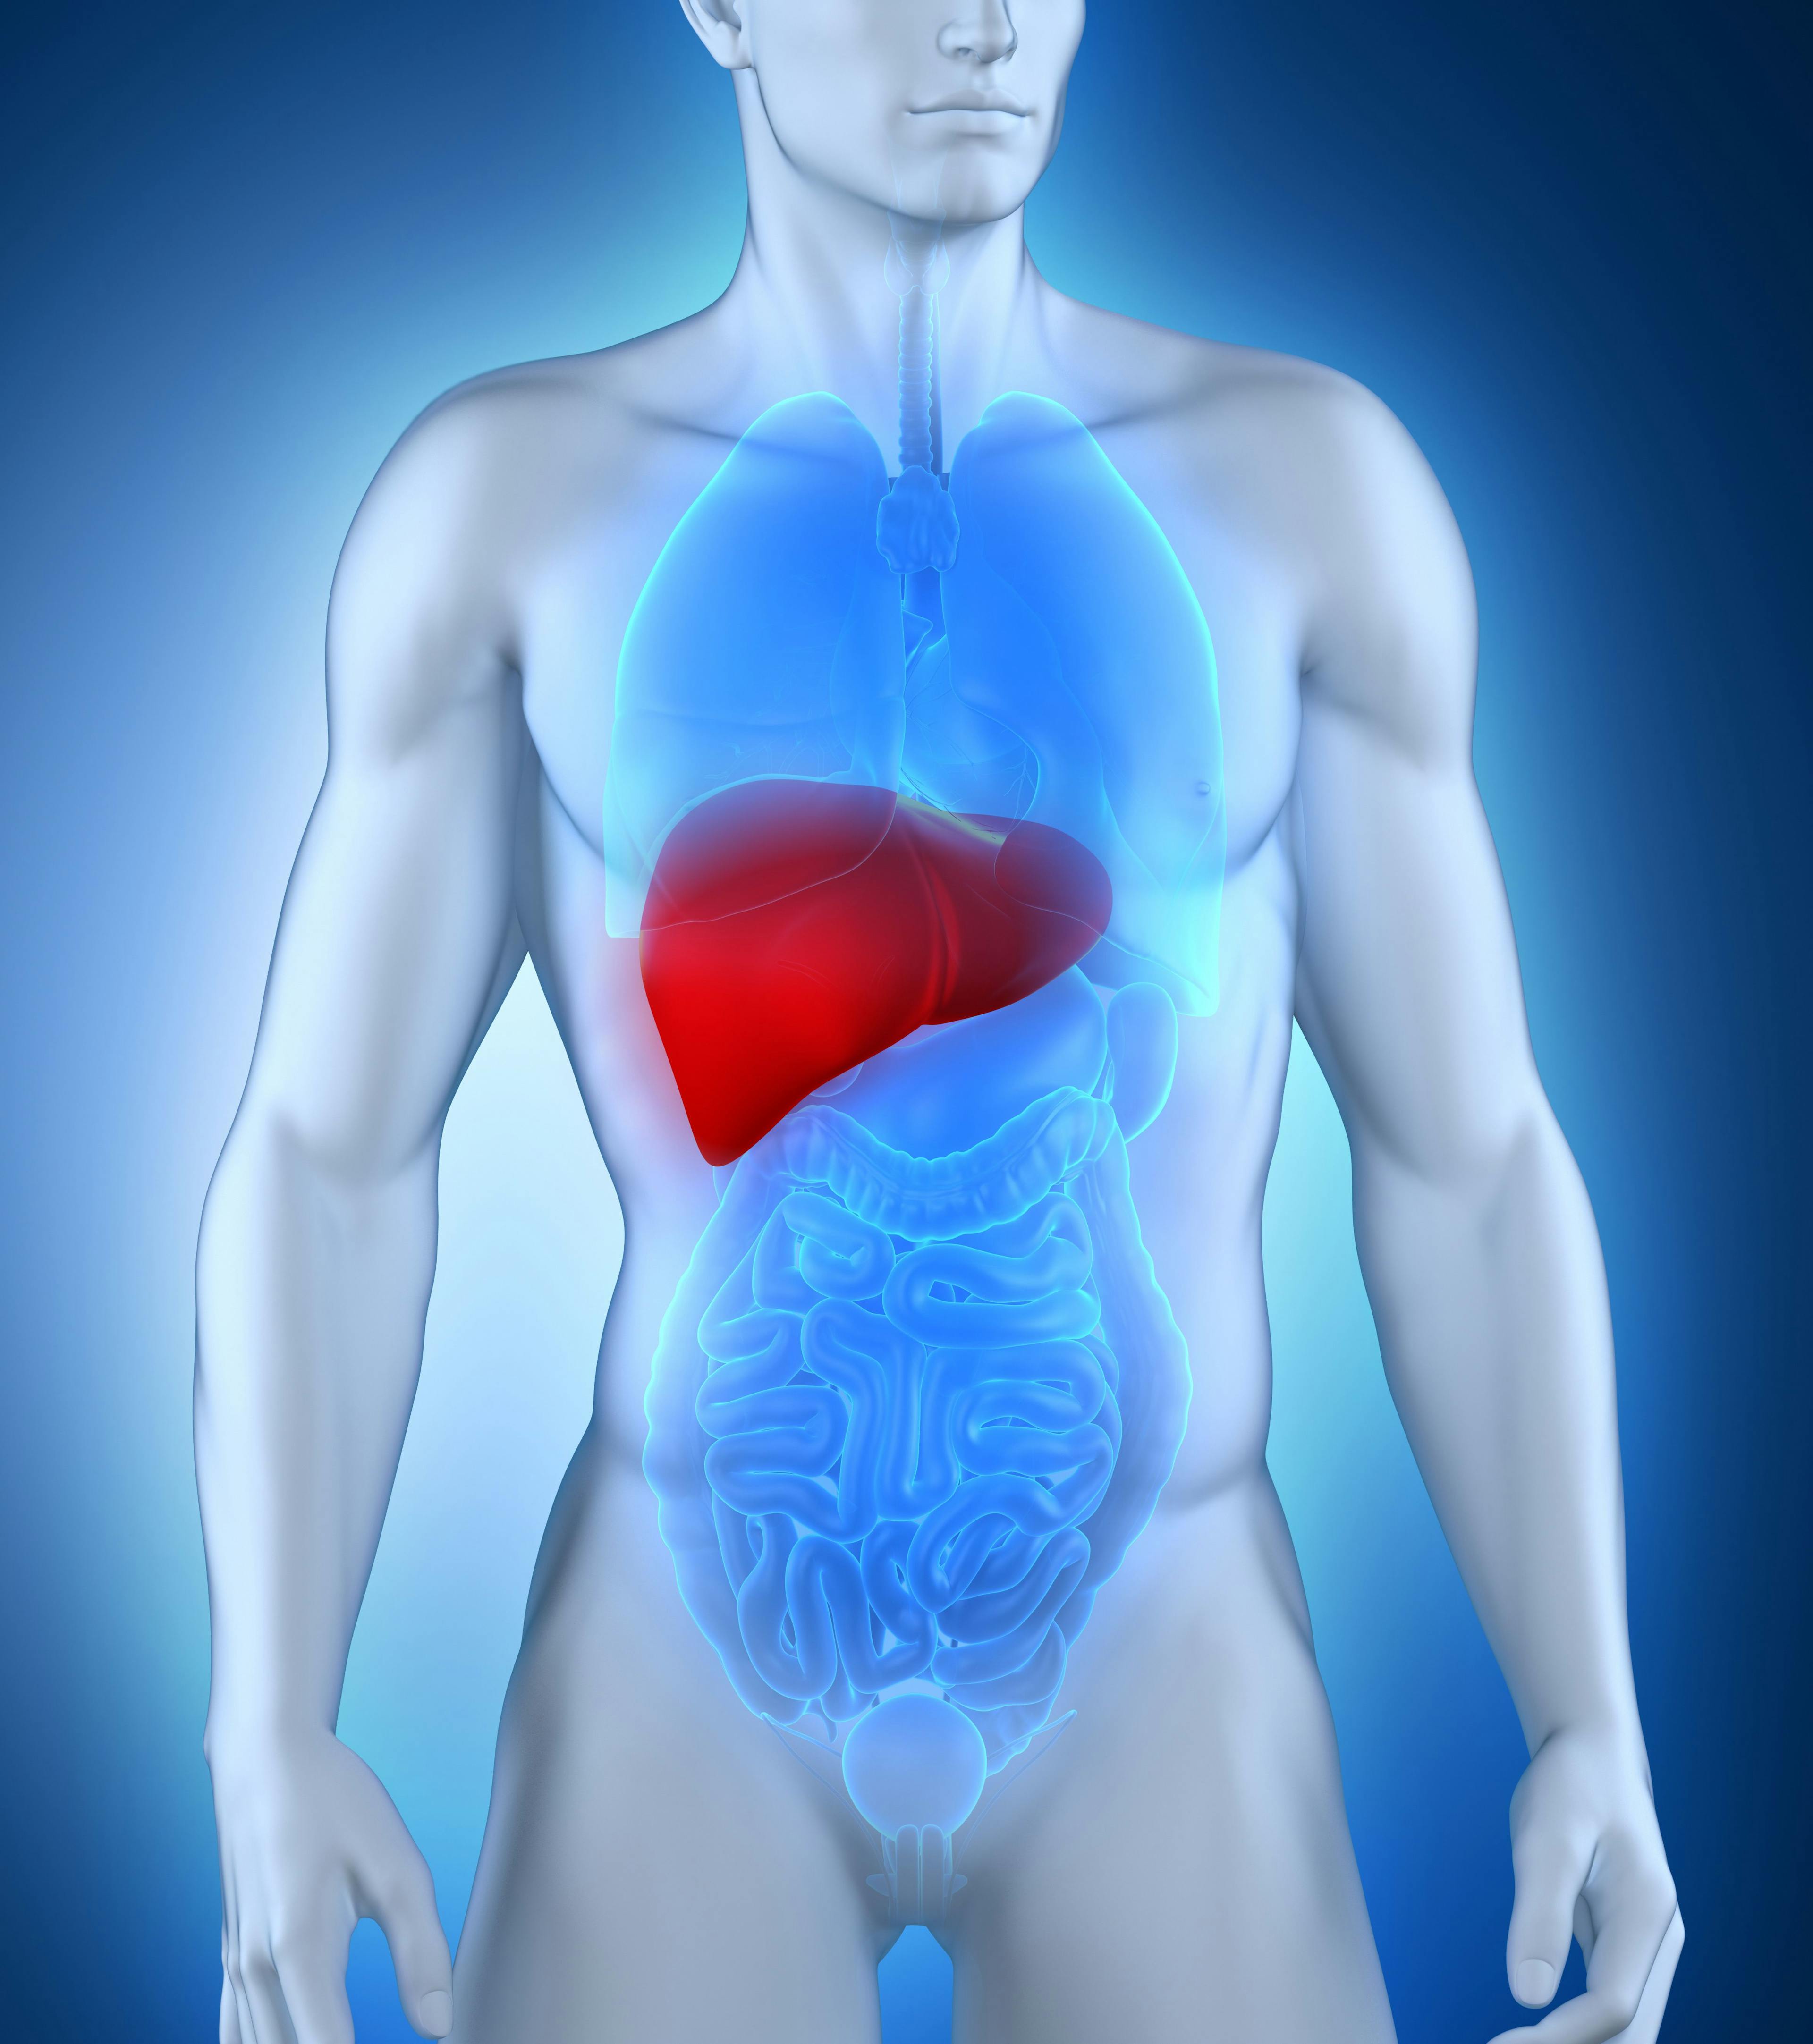 Lenvatinib yields survival benefit in hepatocellular carcinoma following progression on immunotherapy.